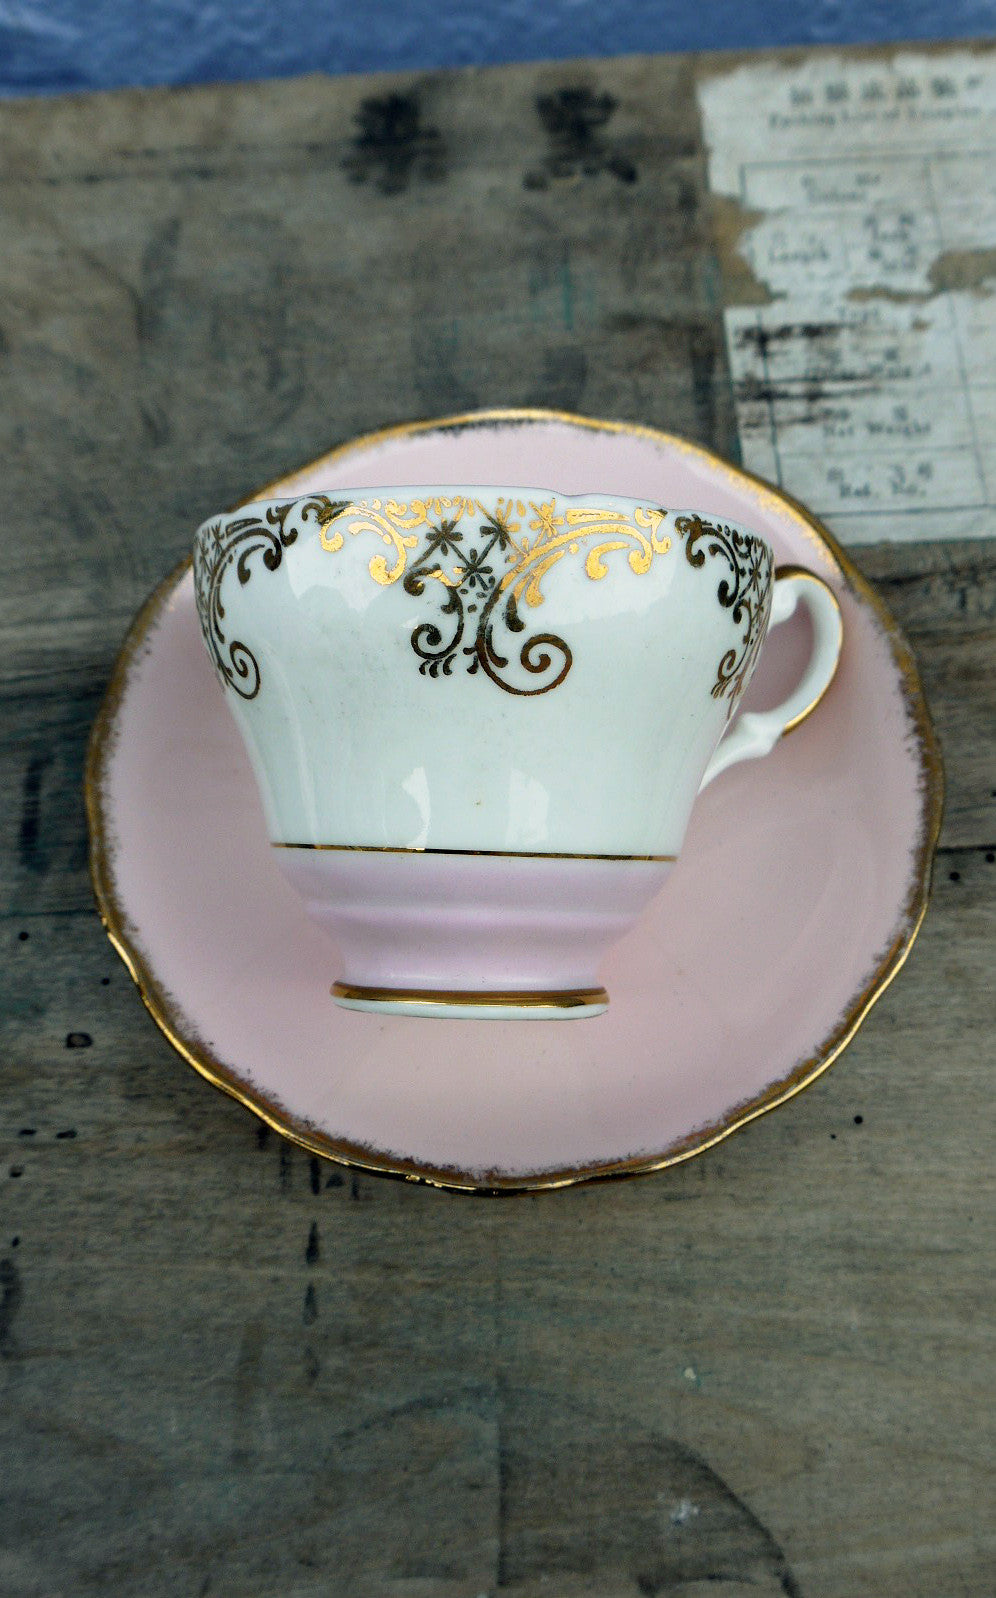 Vintage pink gold and white teacup